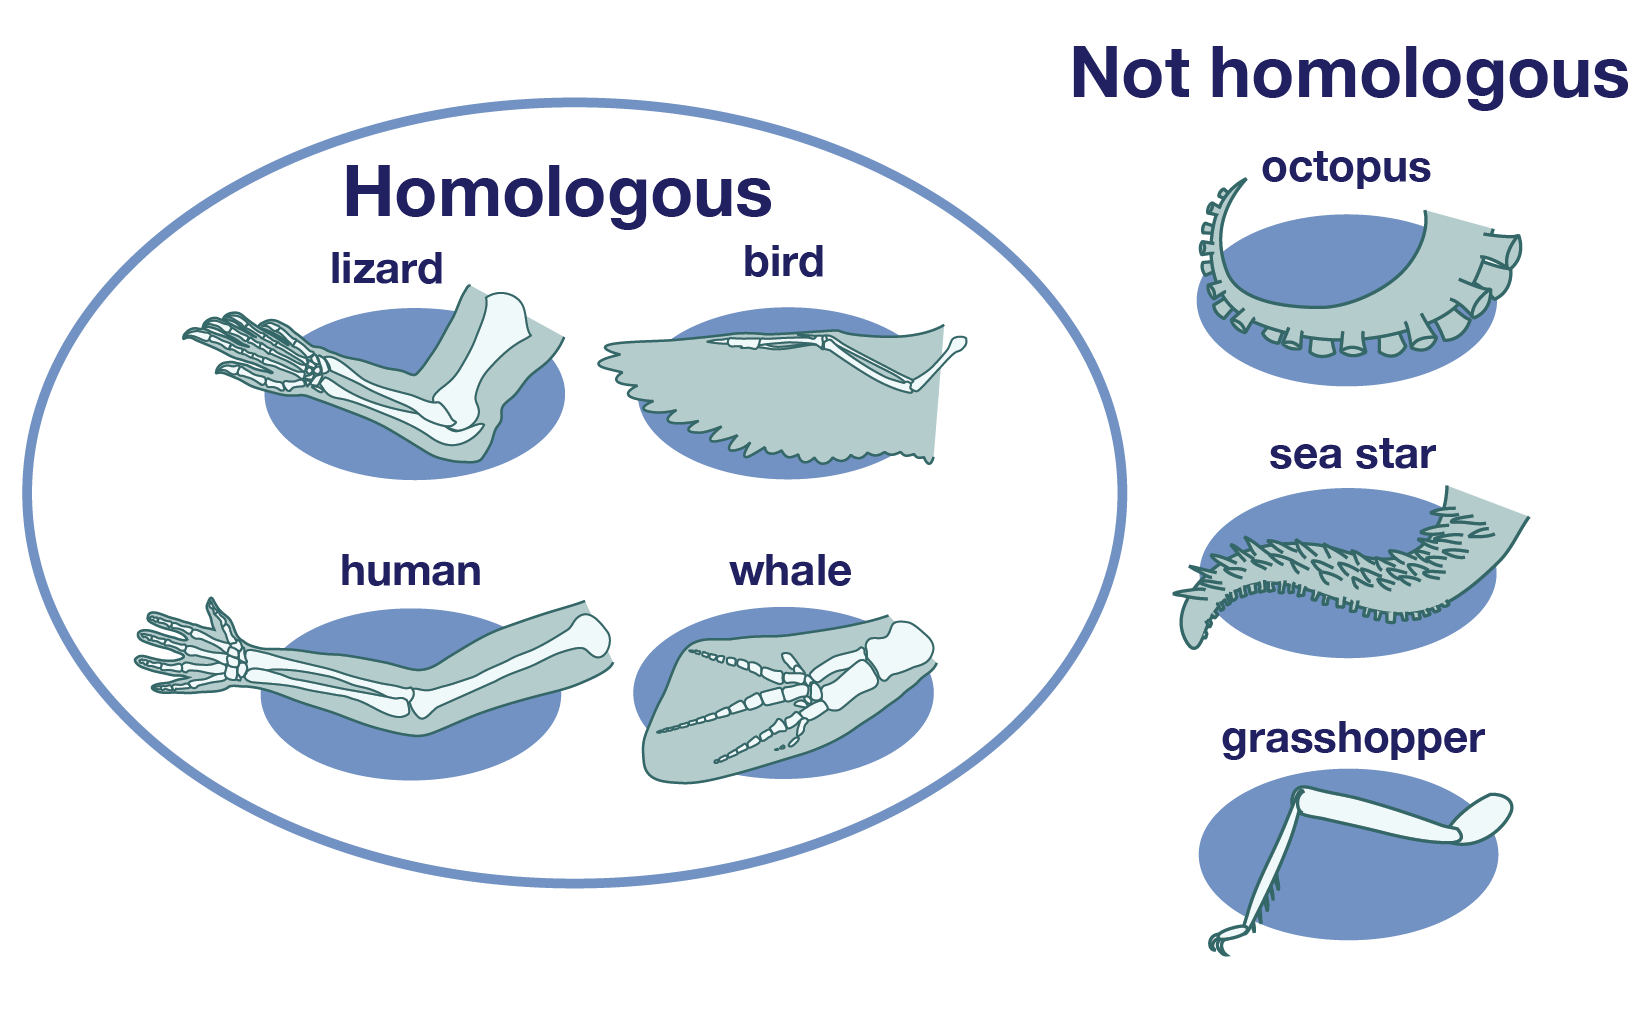 The lizard, bird, human and whale limbs are homologous. The octopus, sea star and grasshopper limbs are not homologous with the others.